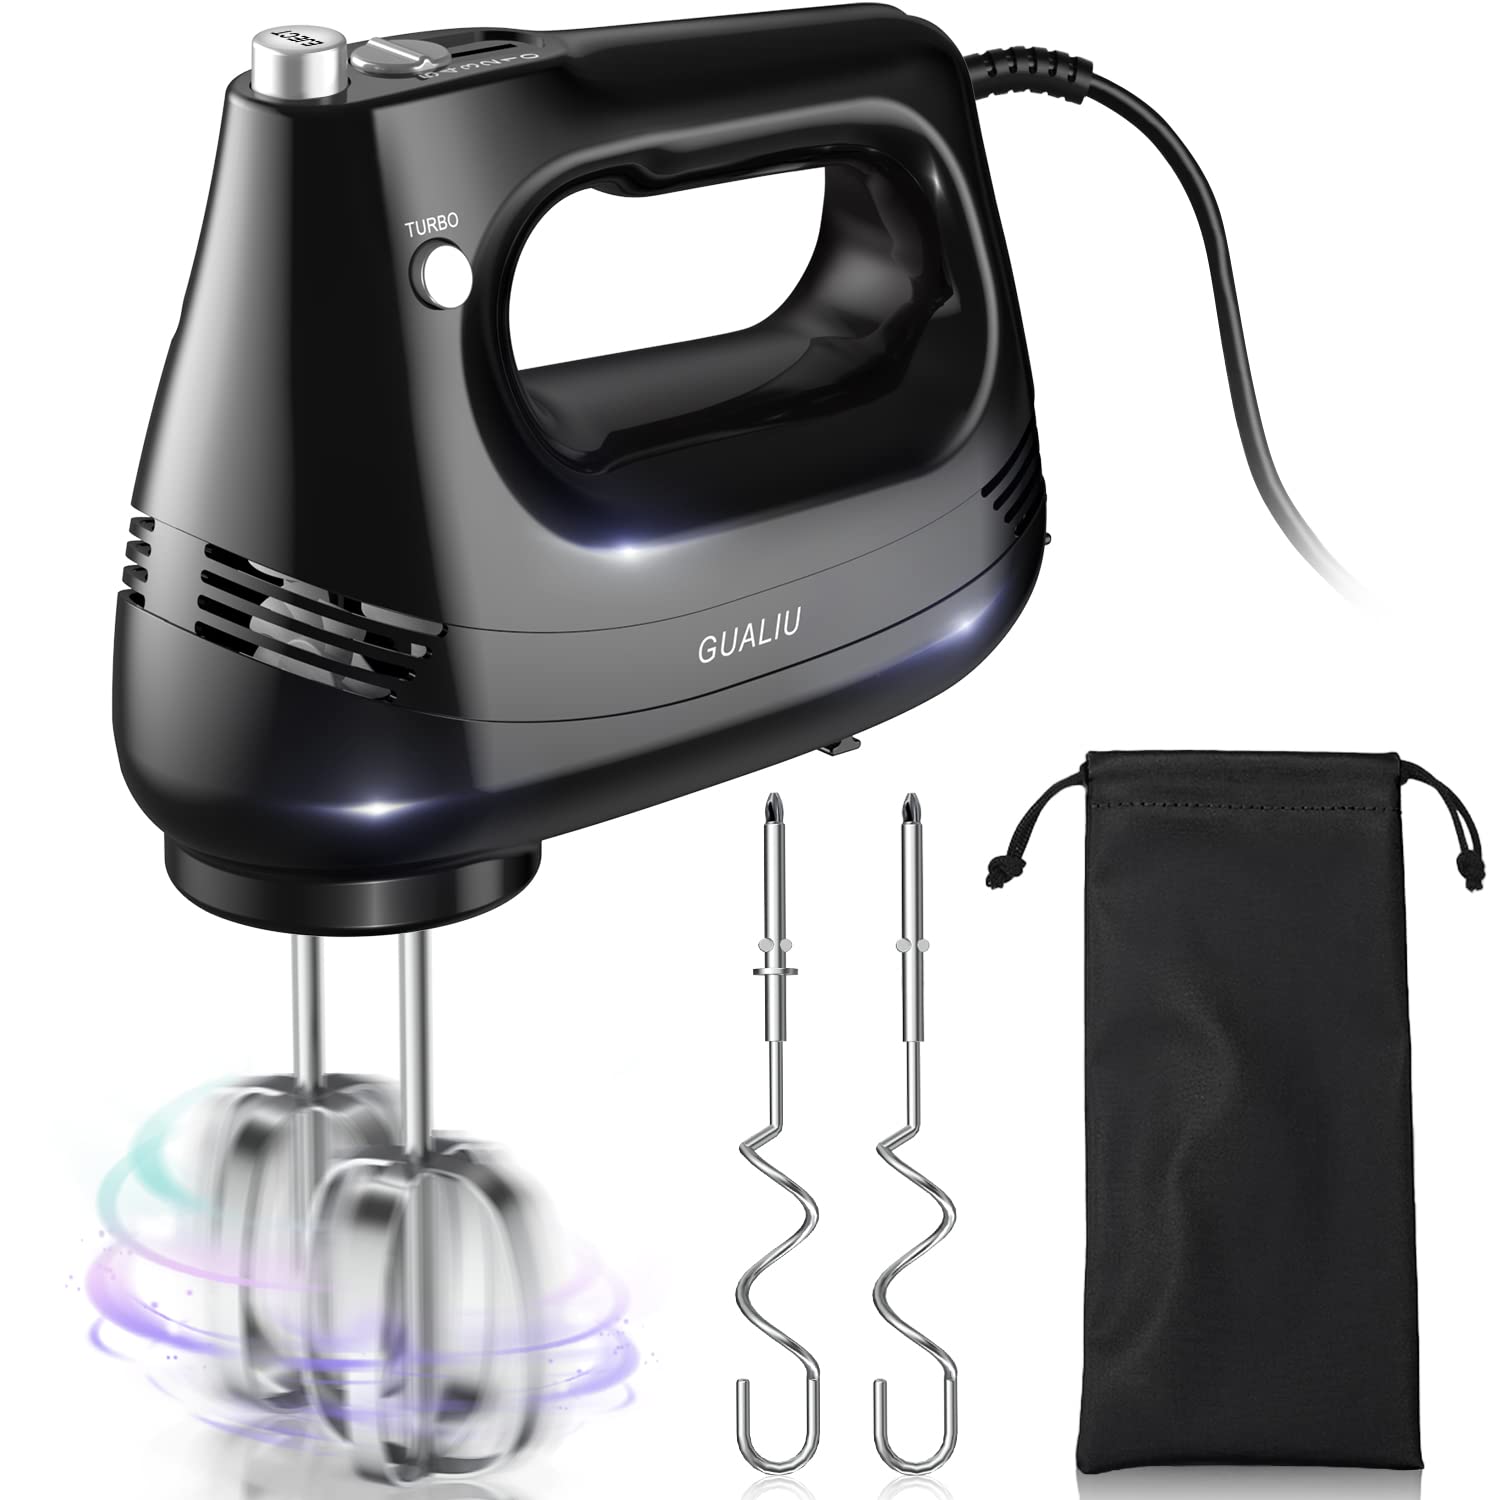 GUALIU Electric Hand Mixer with Stainless Steel Egg Beater, Dough Hook Attachment and Storage Bag Compact Lightweight Hand Mixer for Baking Cakes, Eggs, Cream Food Mixers. Turbocharged /5 Speed + Eject Button Kitchen Blender